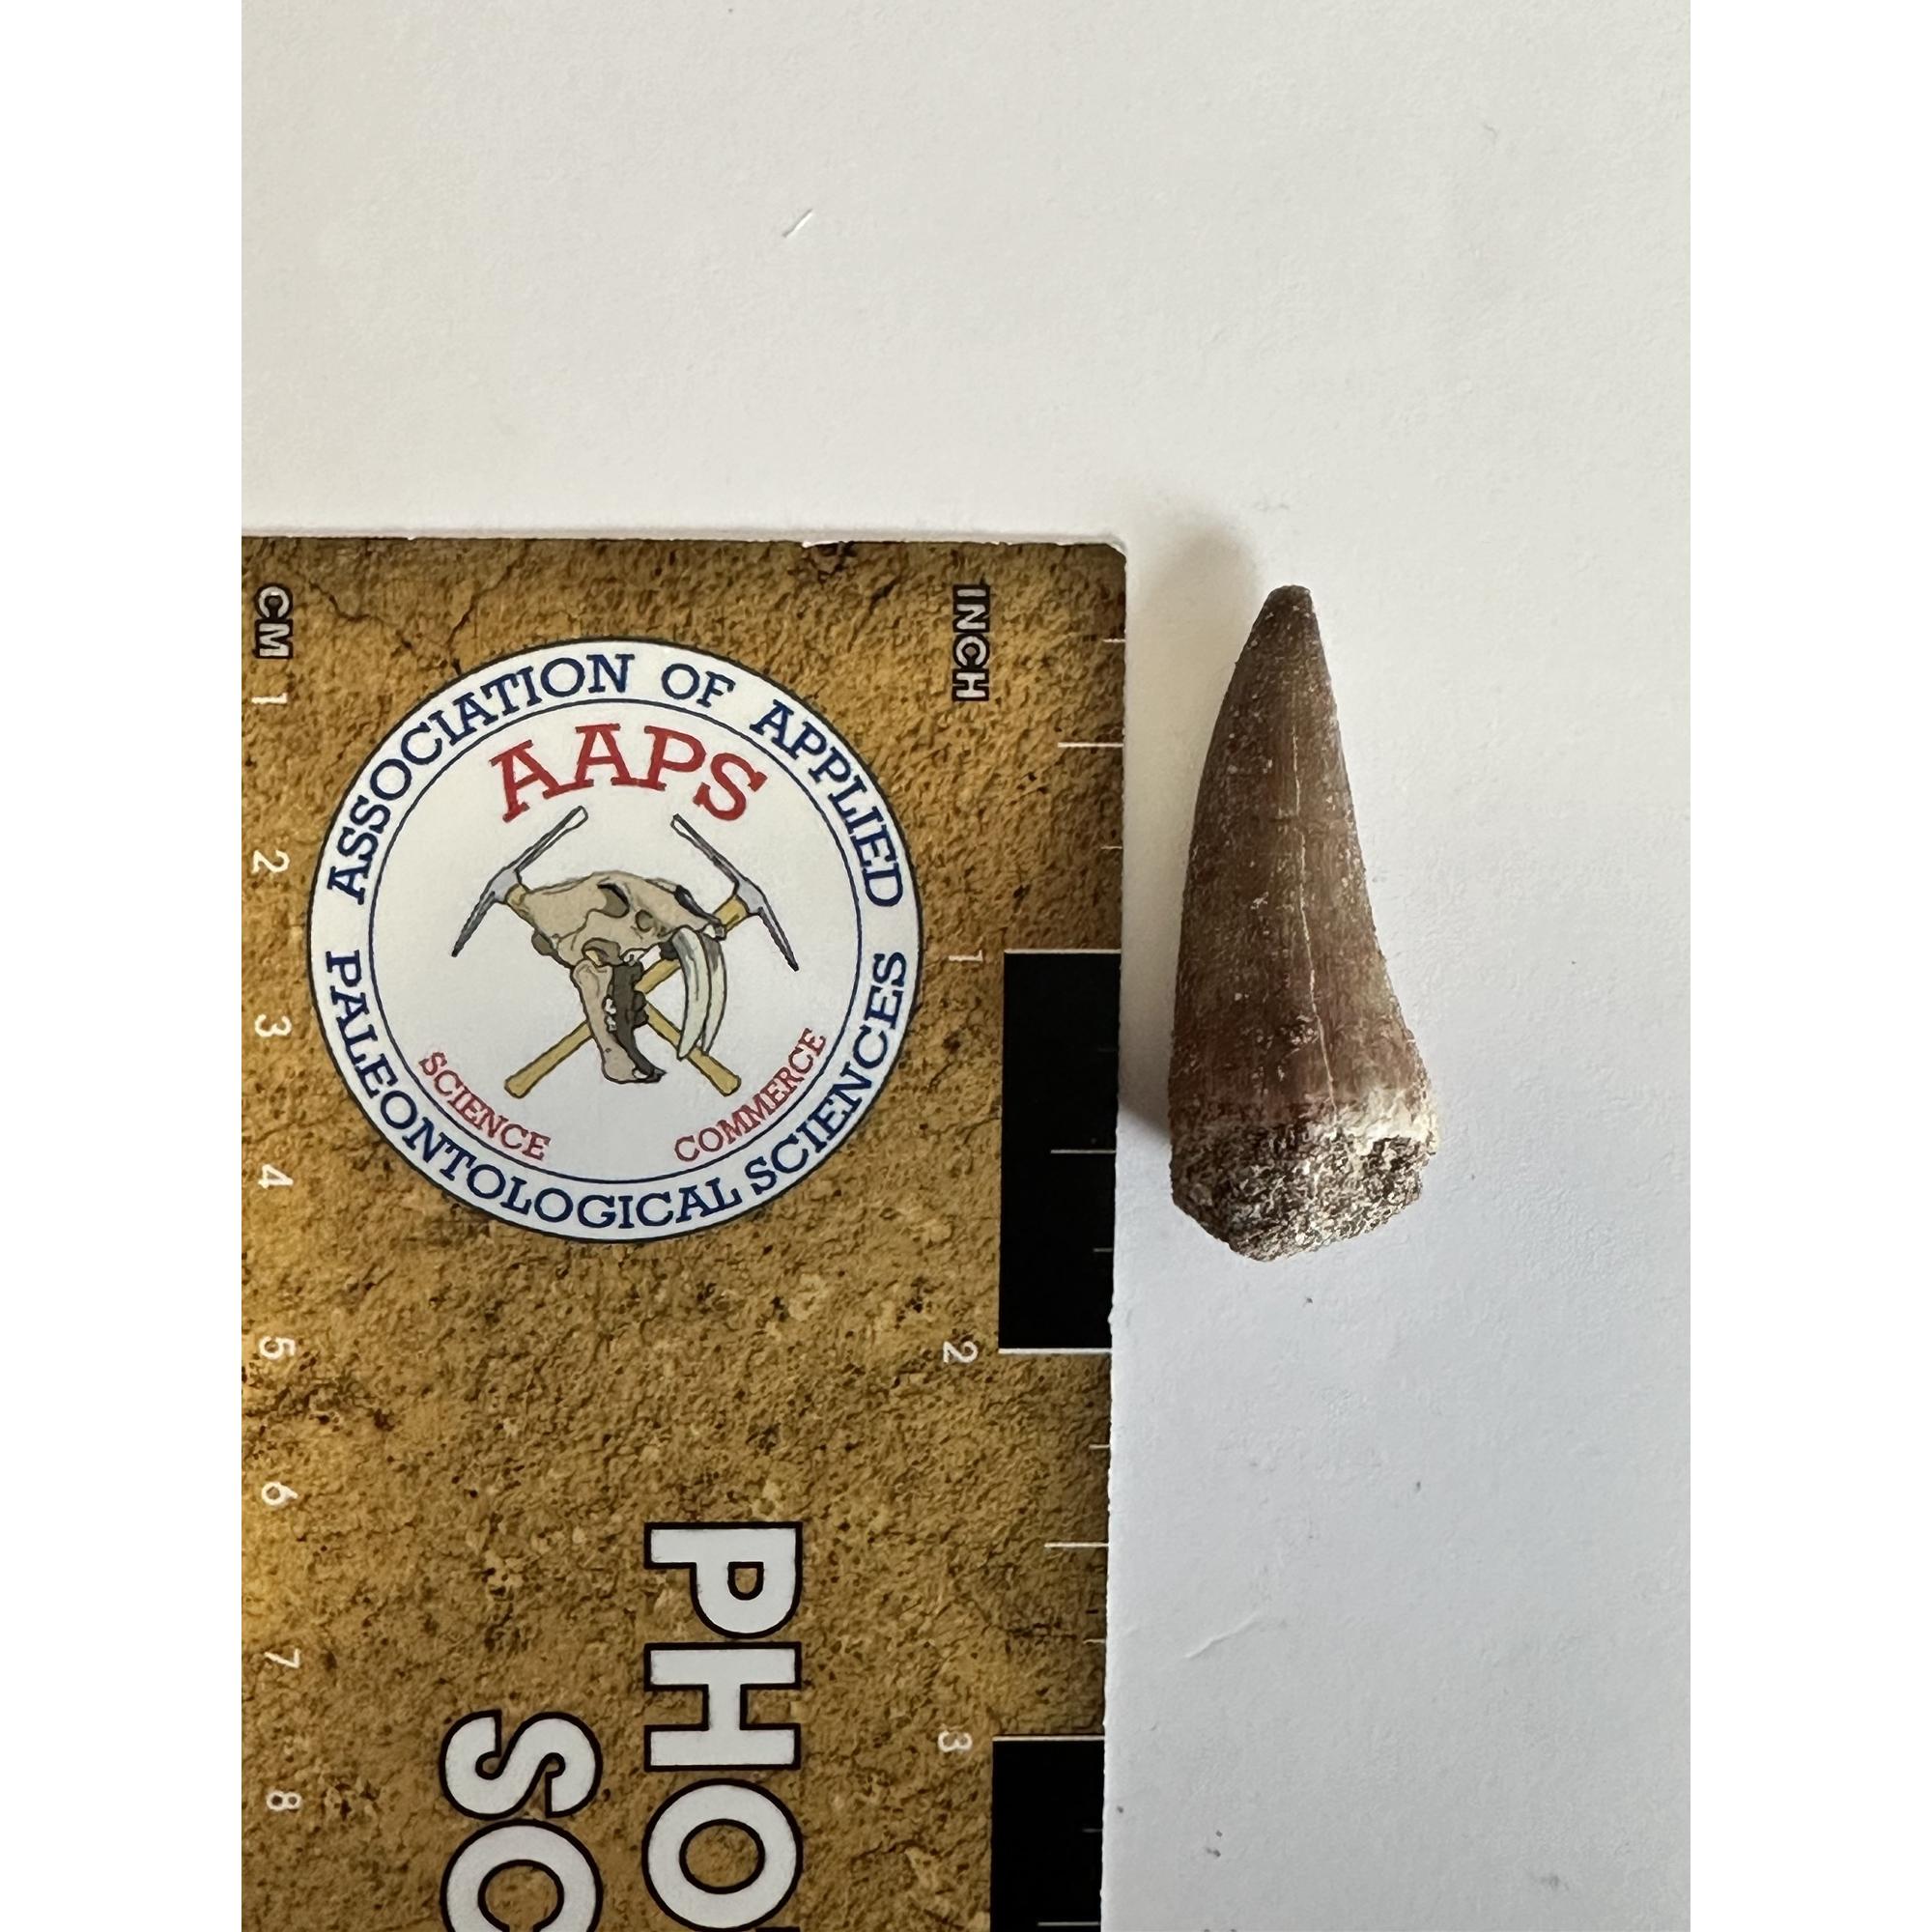 Mosasaurus tooth, 1 3/4 inches Prehistoric Online